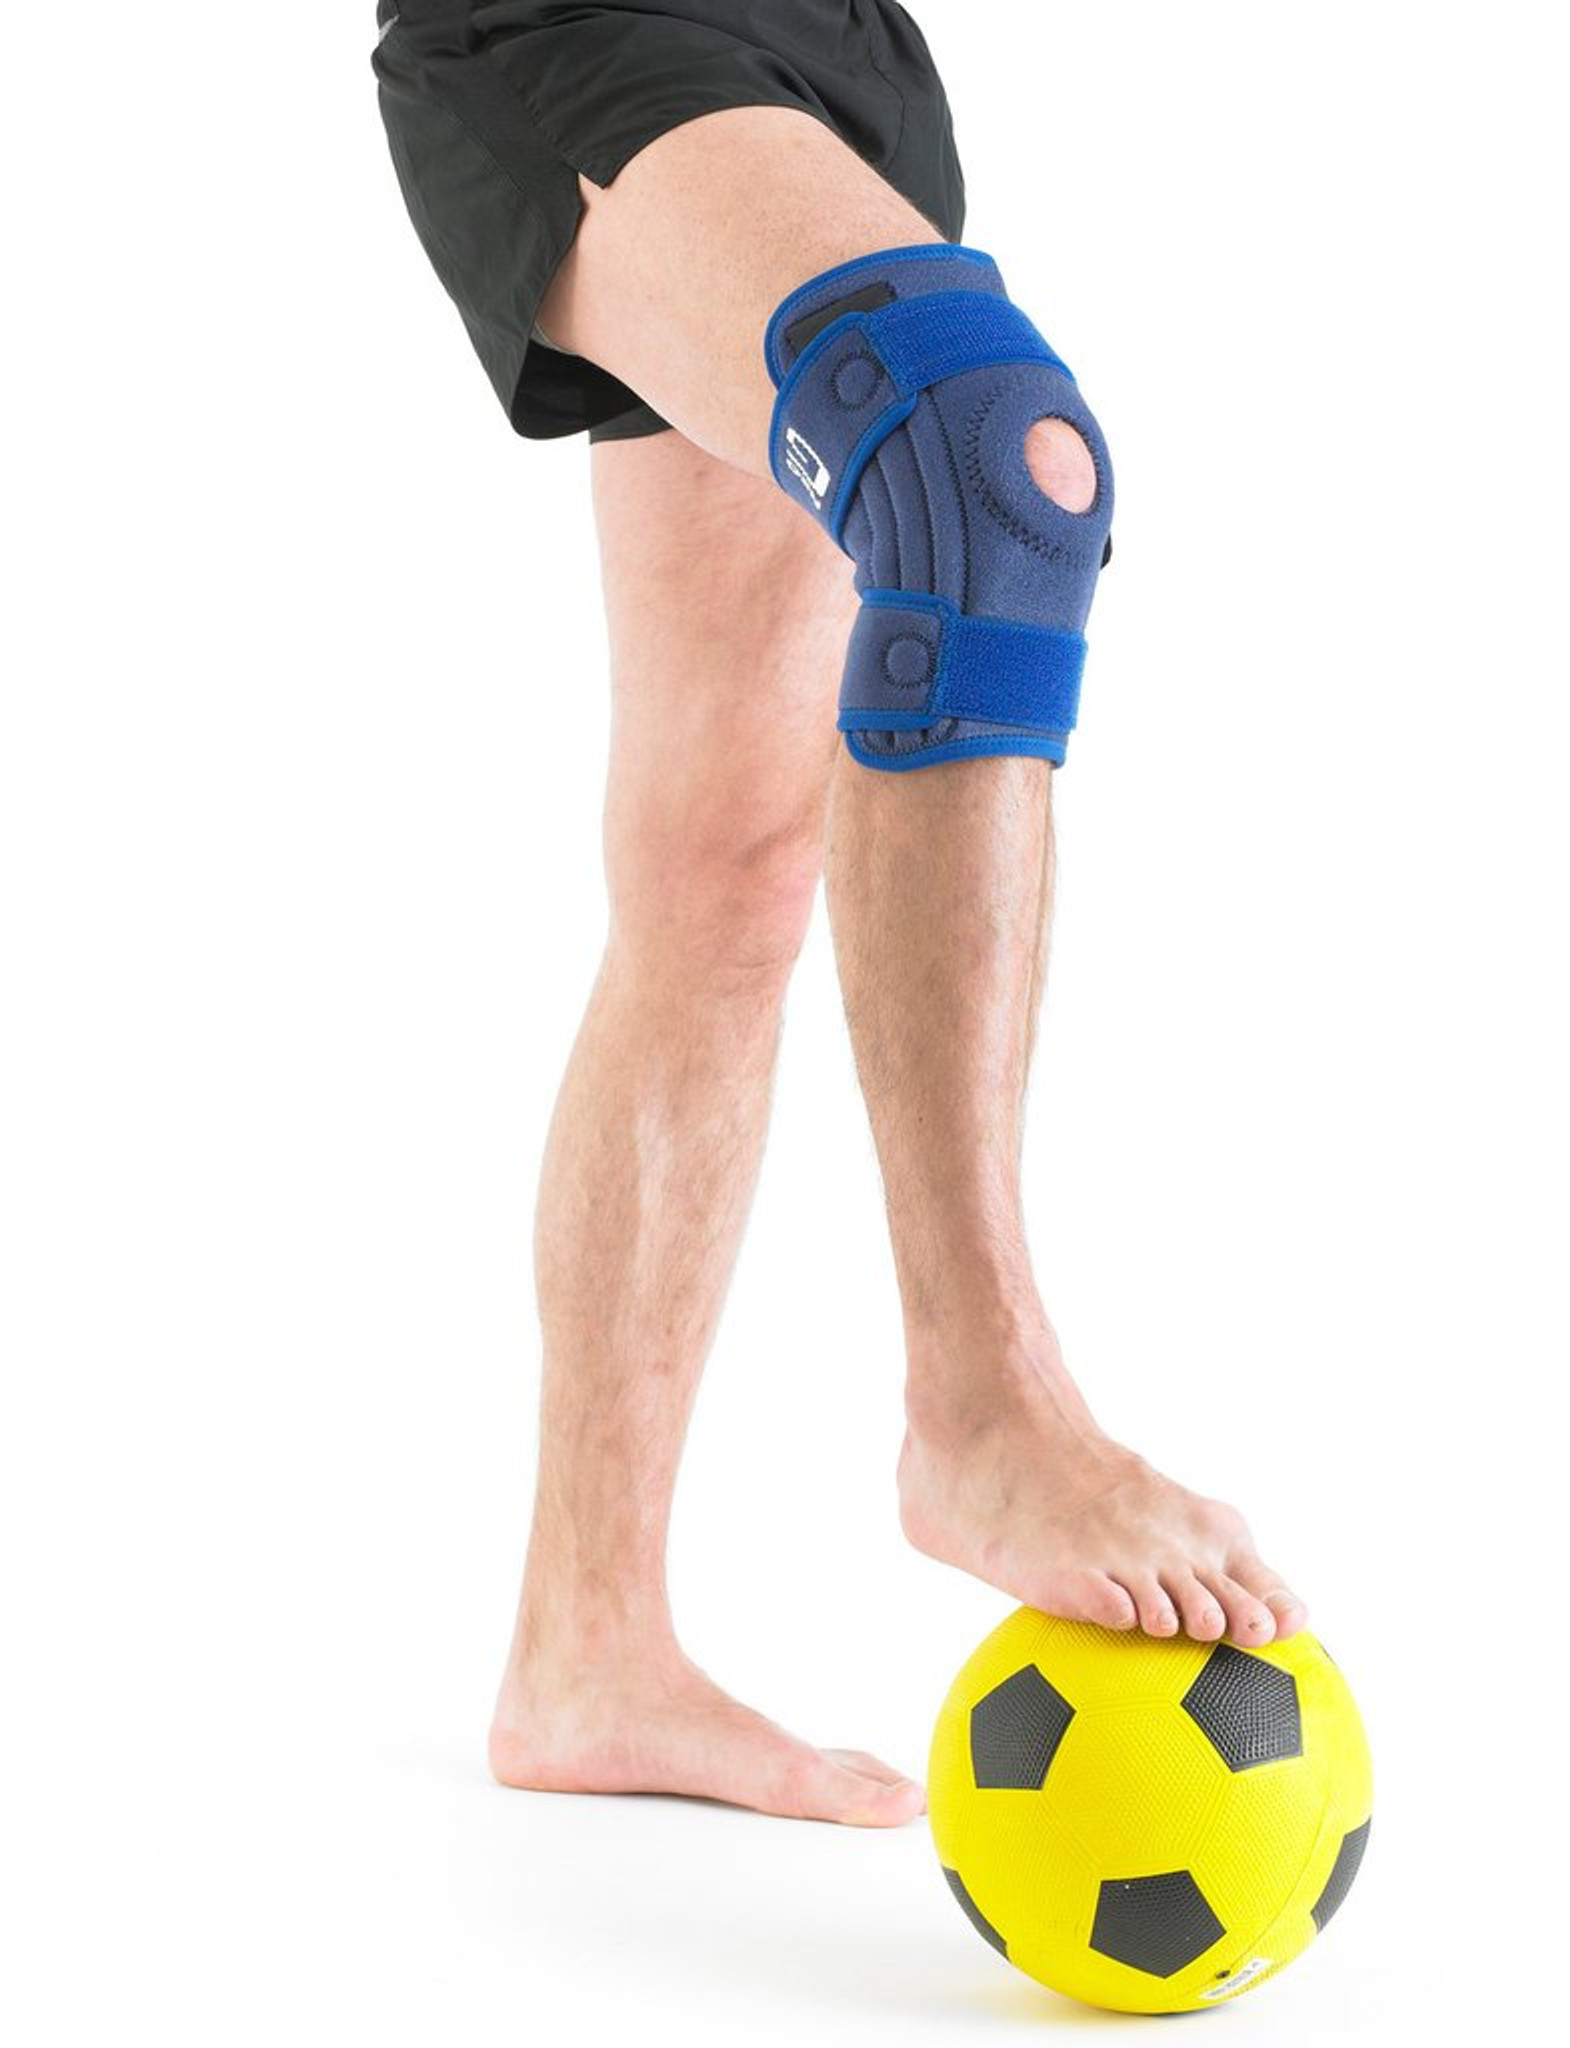 Neo G Stabilized Open Knee Suport OSFA #893 